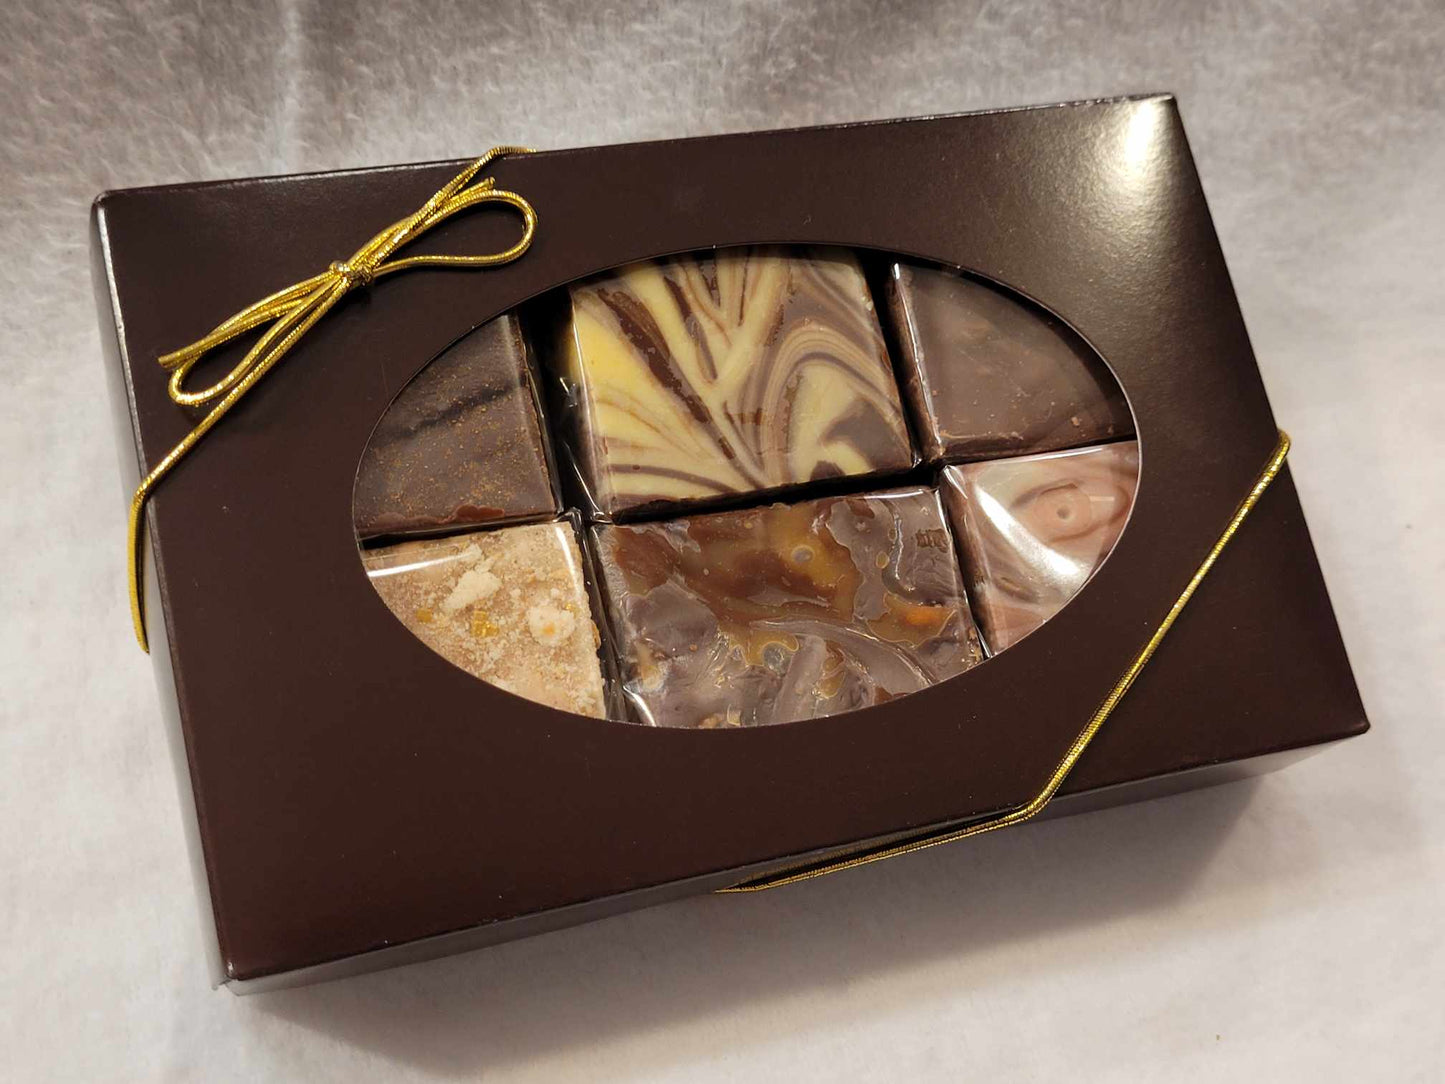 6 Piece Fudge Sampler in Gift Box - Your Choice of Flavors